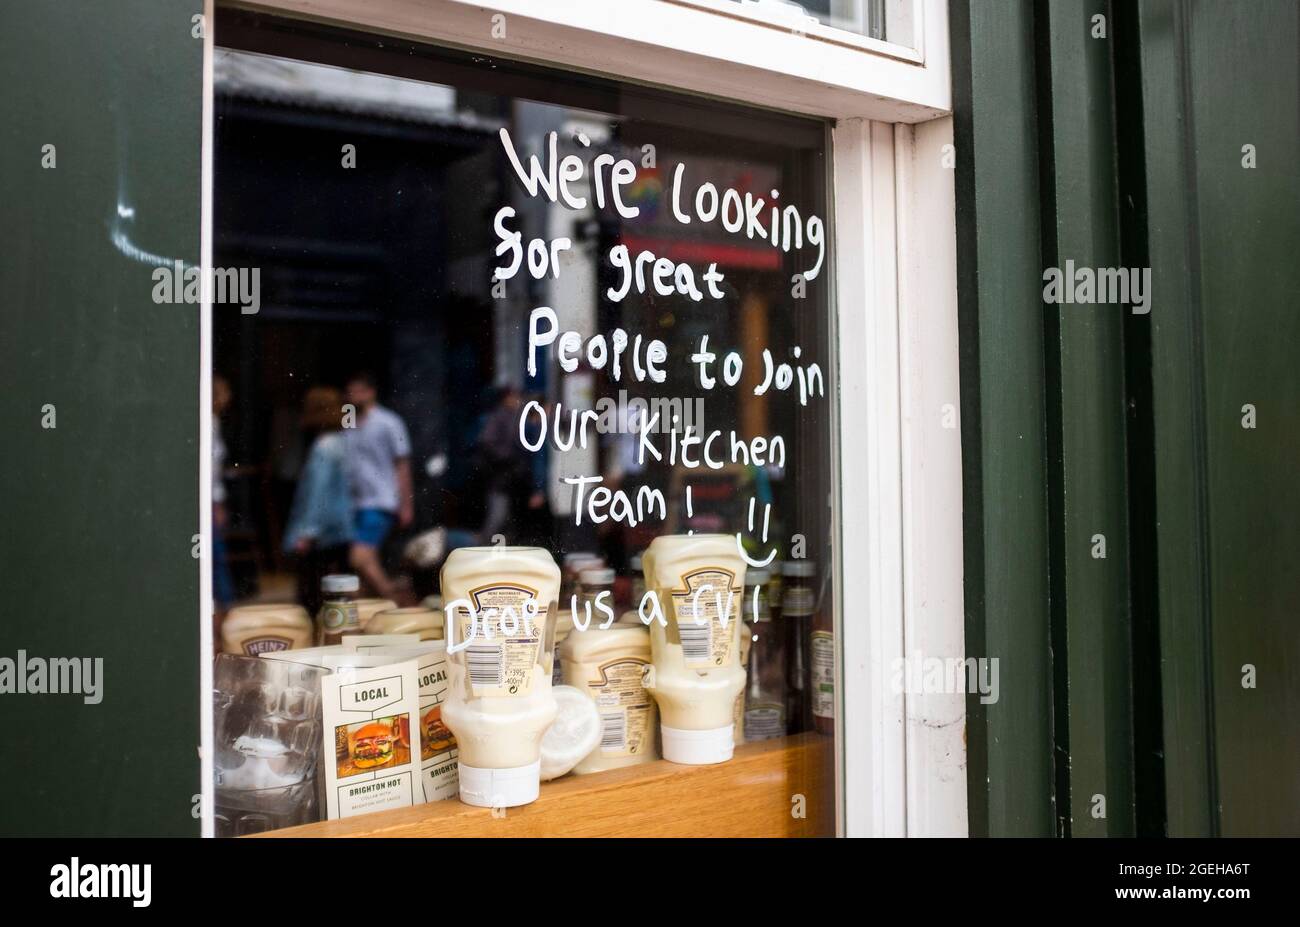 Brighton, UK. 20th Aug, 2021. Staff Wanted signs as Brighton shops and restaurants are busy during the summer holidays in Britain . Some businesses in the UK have been struggling to find enough staff since the lockdown restrictions have been eased : Credit Simon Dack/Alamy Live News Stock Photo